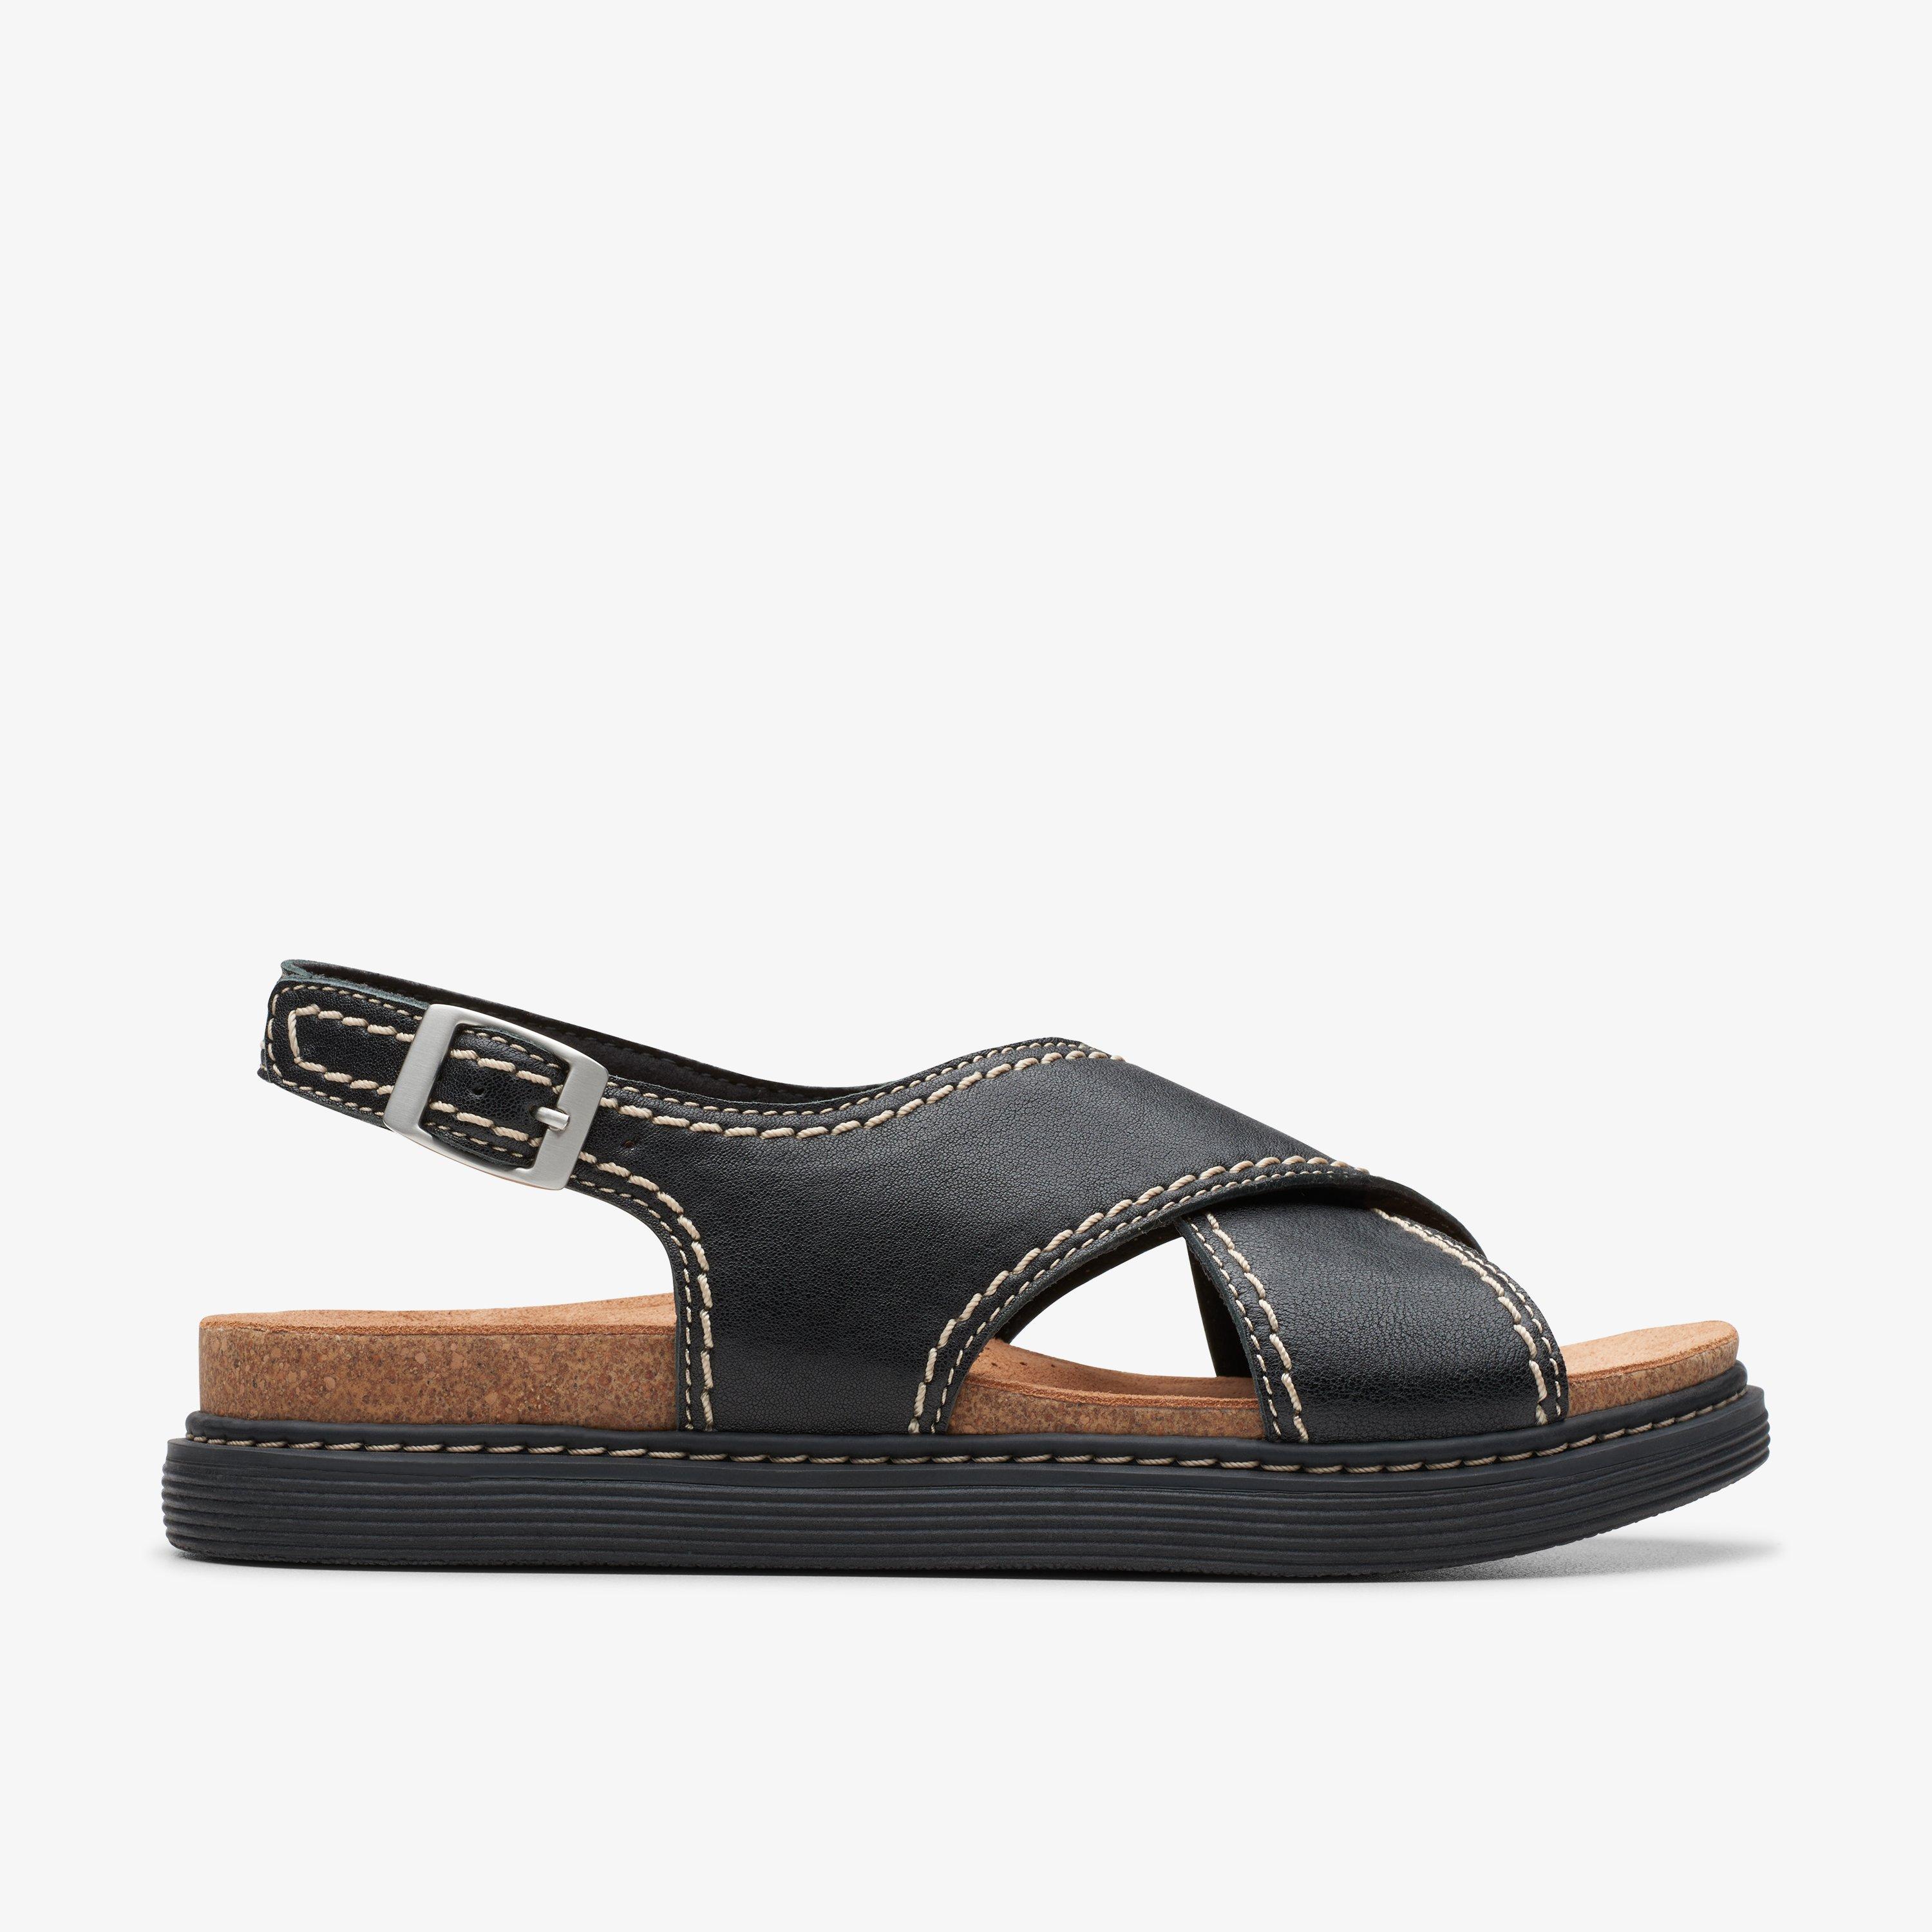 WOMENS Arwell Sling Black Leather Flat Sandals | Clarks US